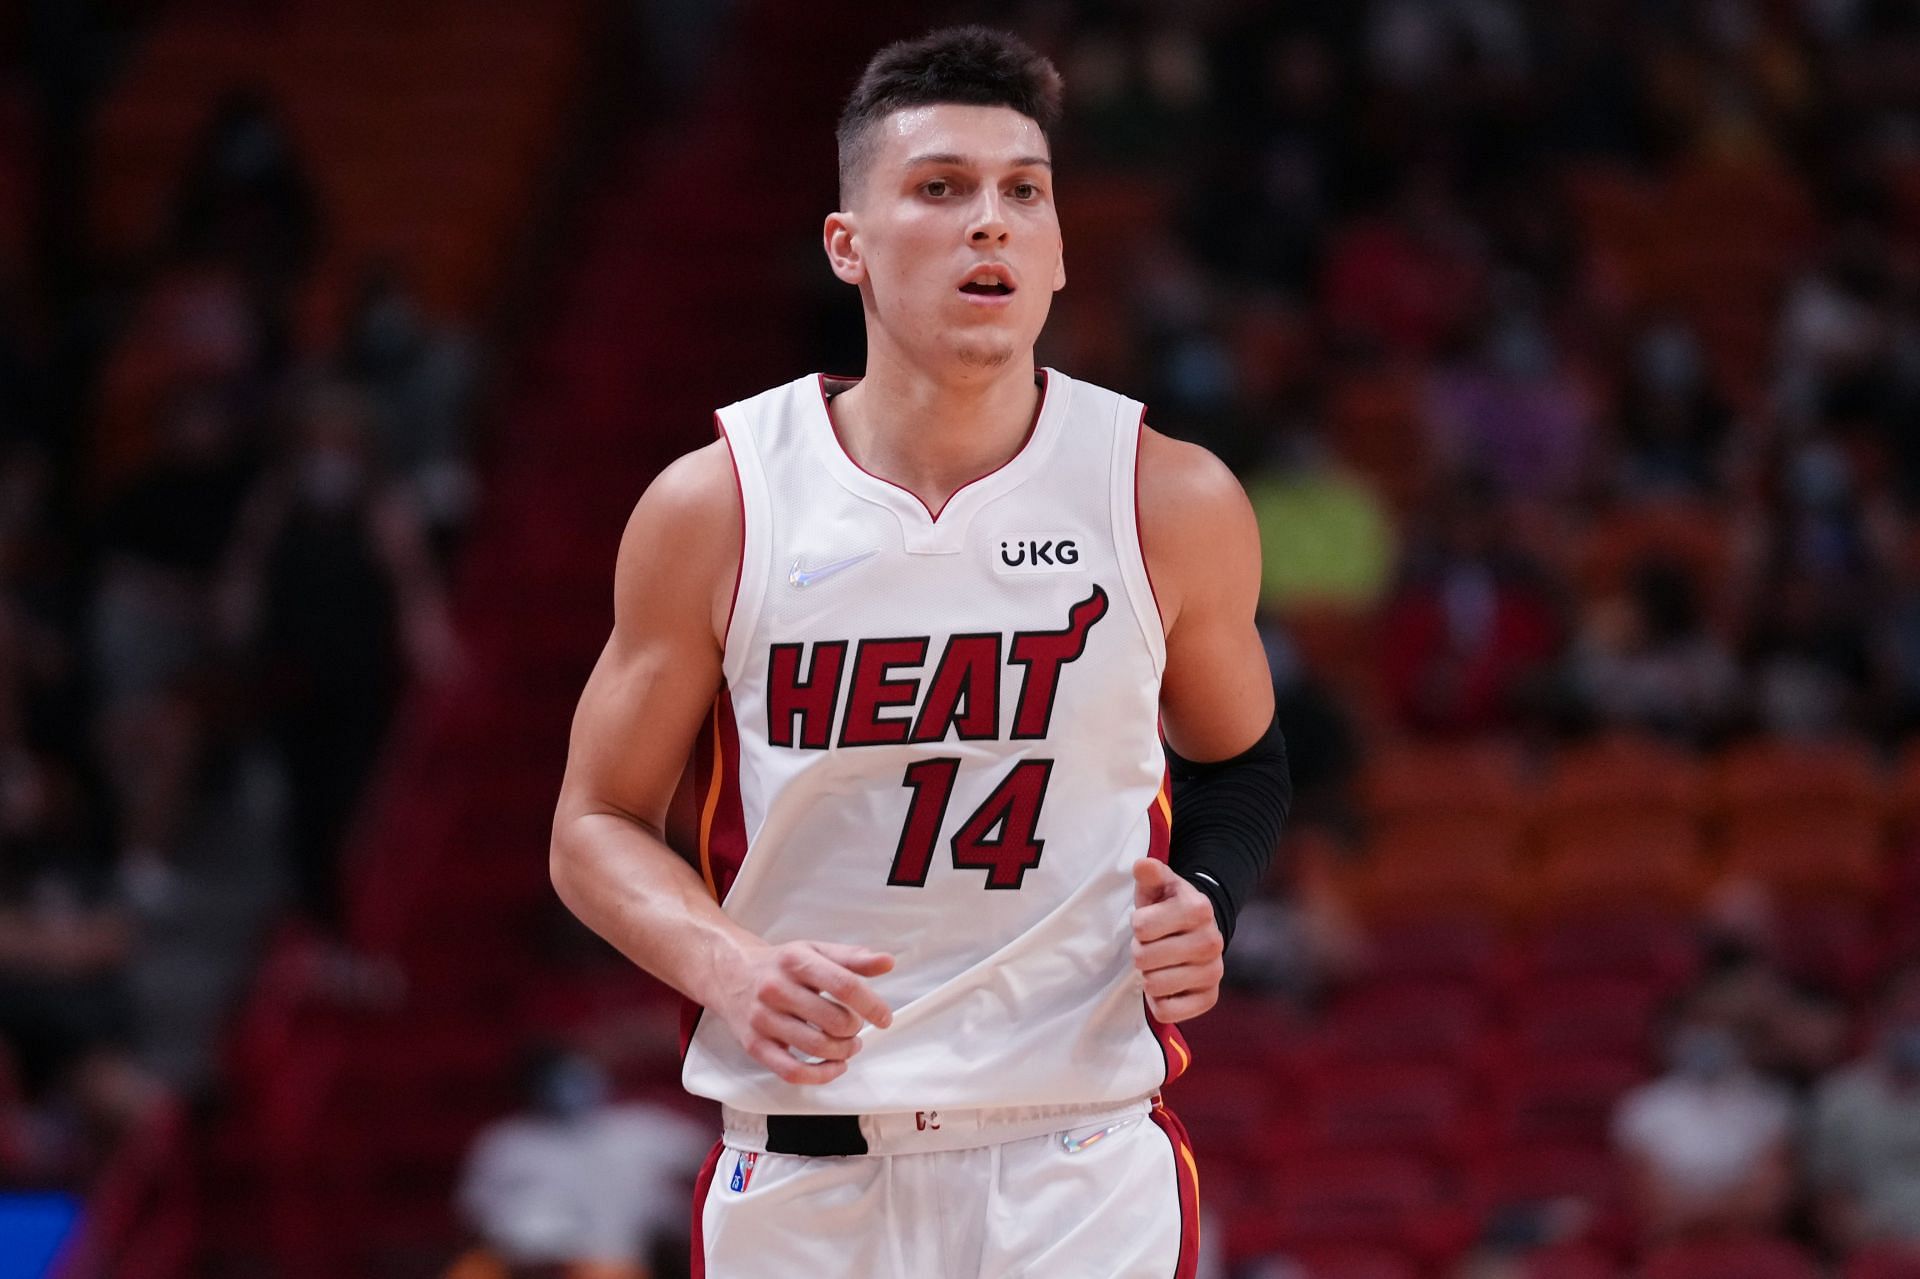 Miami Heat guard Tyler Herro continues to impress as a Sixth Man of the Year candidate.